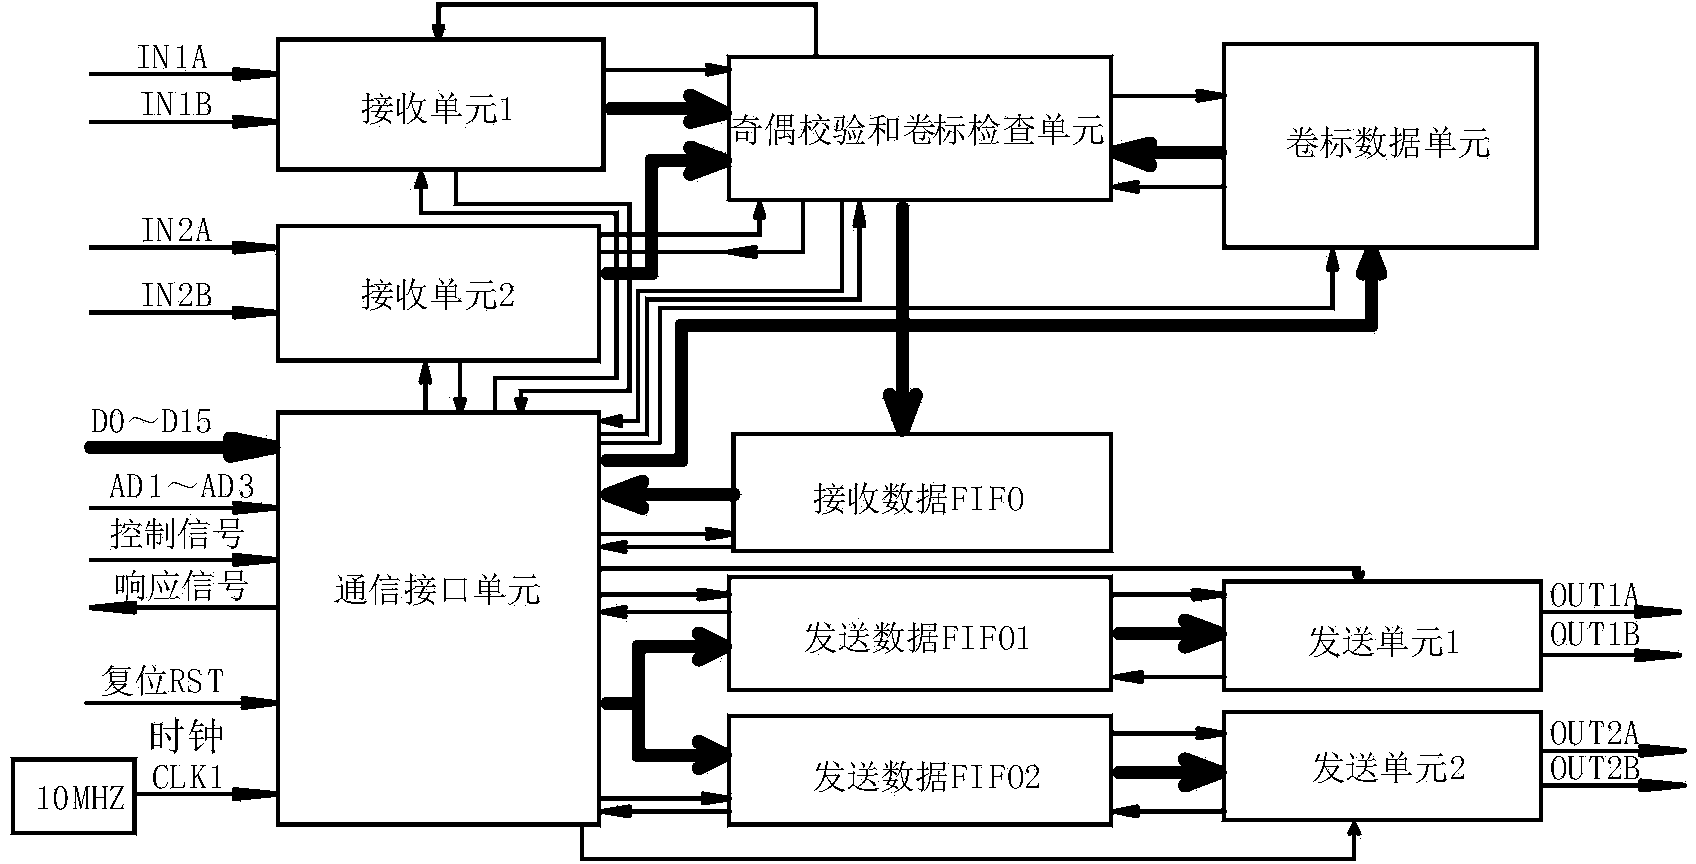 Double-receiving double-emitting programmable ARINC 429 communication interface chip